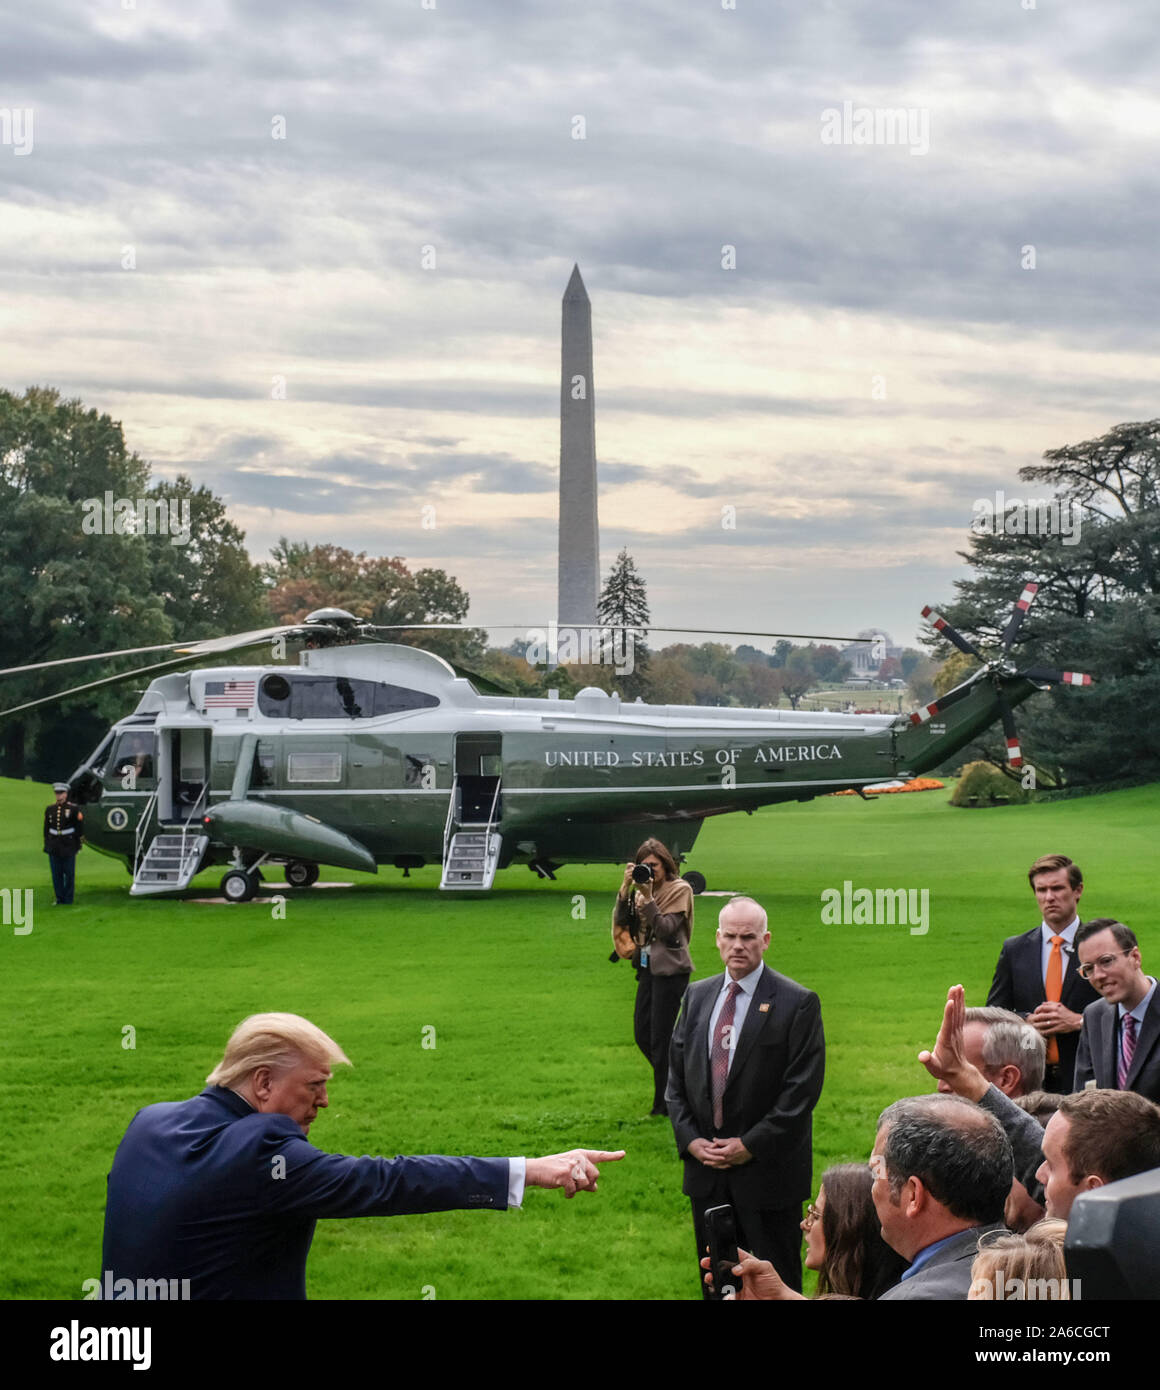 Washington DC, USA. 25th Oct, 2019. President Donald Trump speaks to the press before his departure from the White House on October 25, 2019 in Washington, DC. President Trump is going to South Carolina. Credit: MediaPunch Inc/Alamy Live News Stock Photo